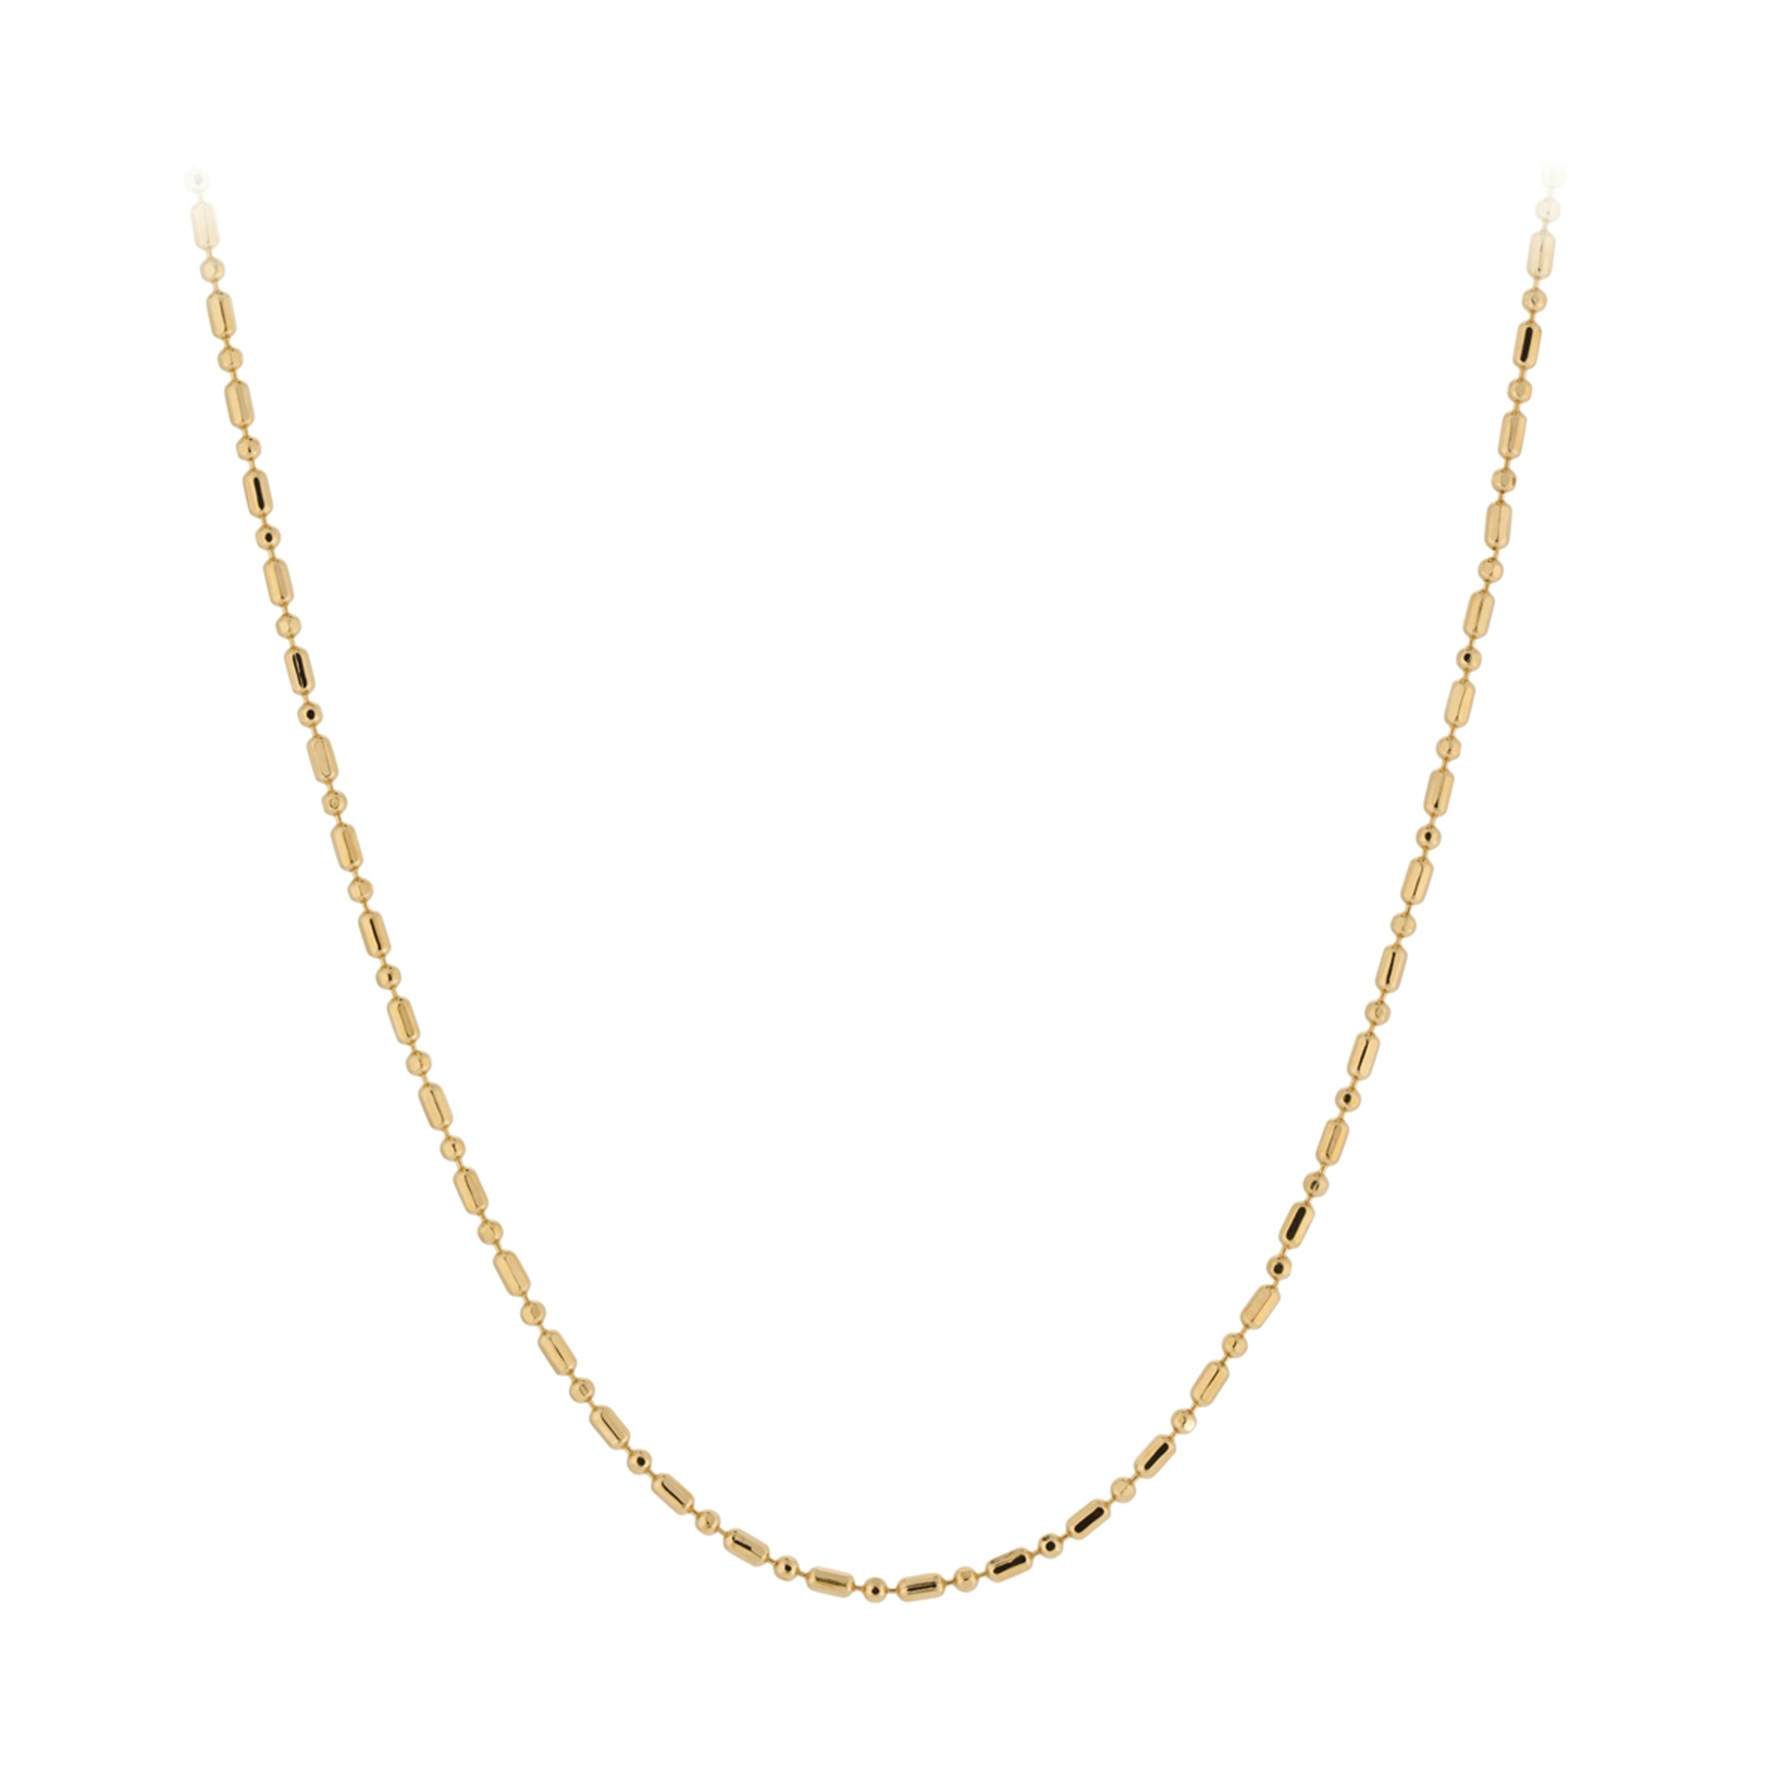 Evelyn Necklace from Pernille Corydon in Goldplated-Silver Sterling 925